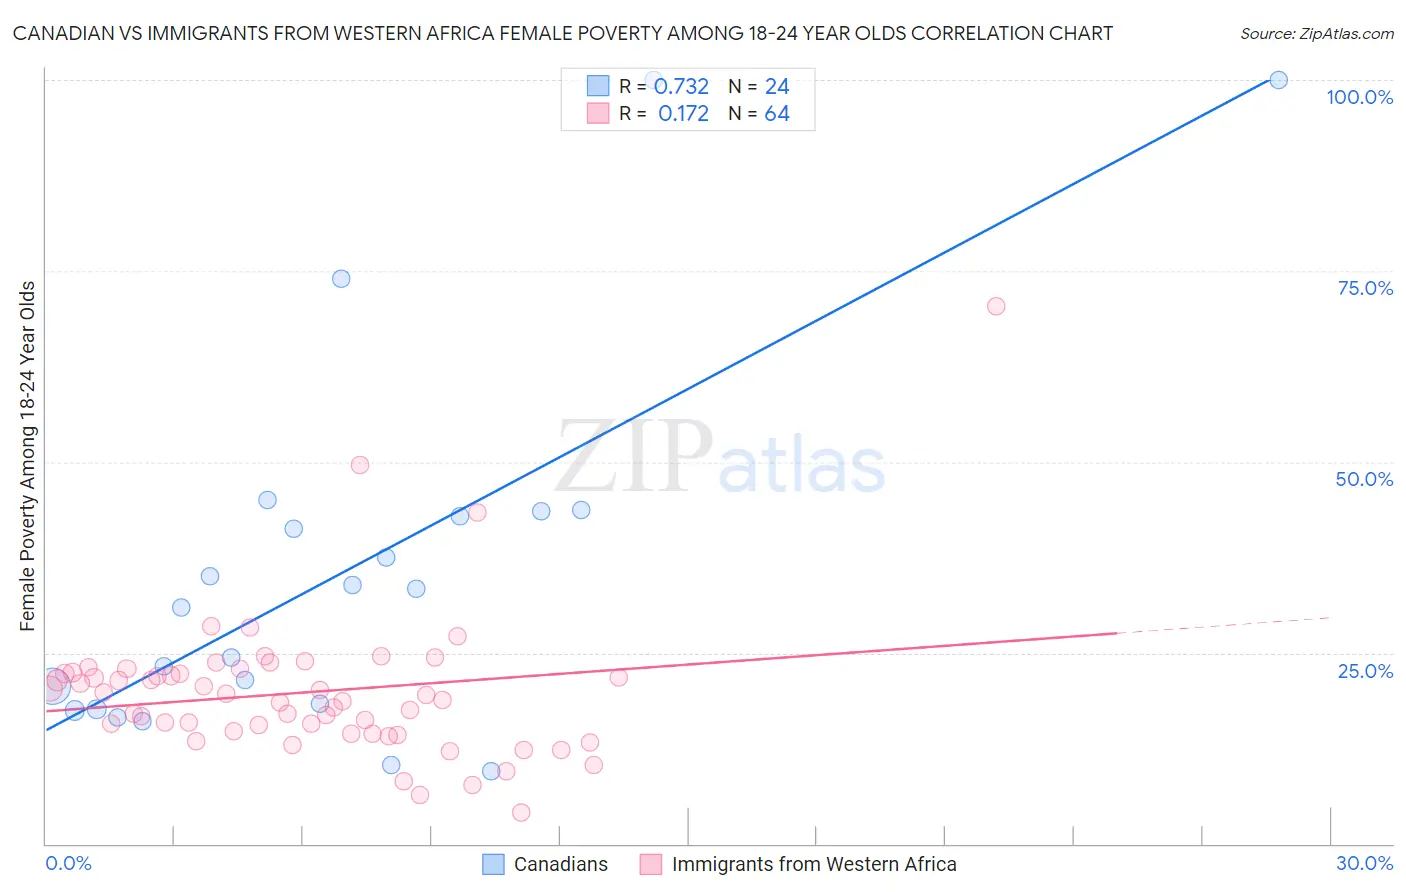 Canadian vs Immigrants from Western Africa Female Poverty Among 18-24 Year Olds